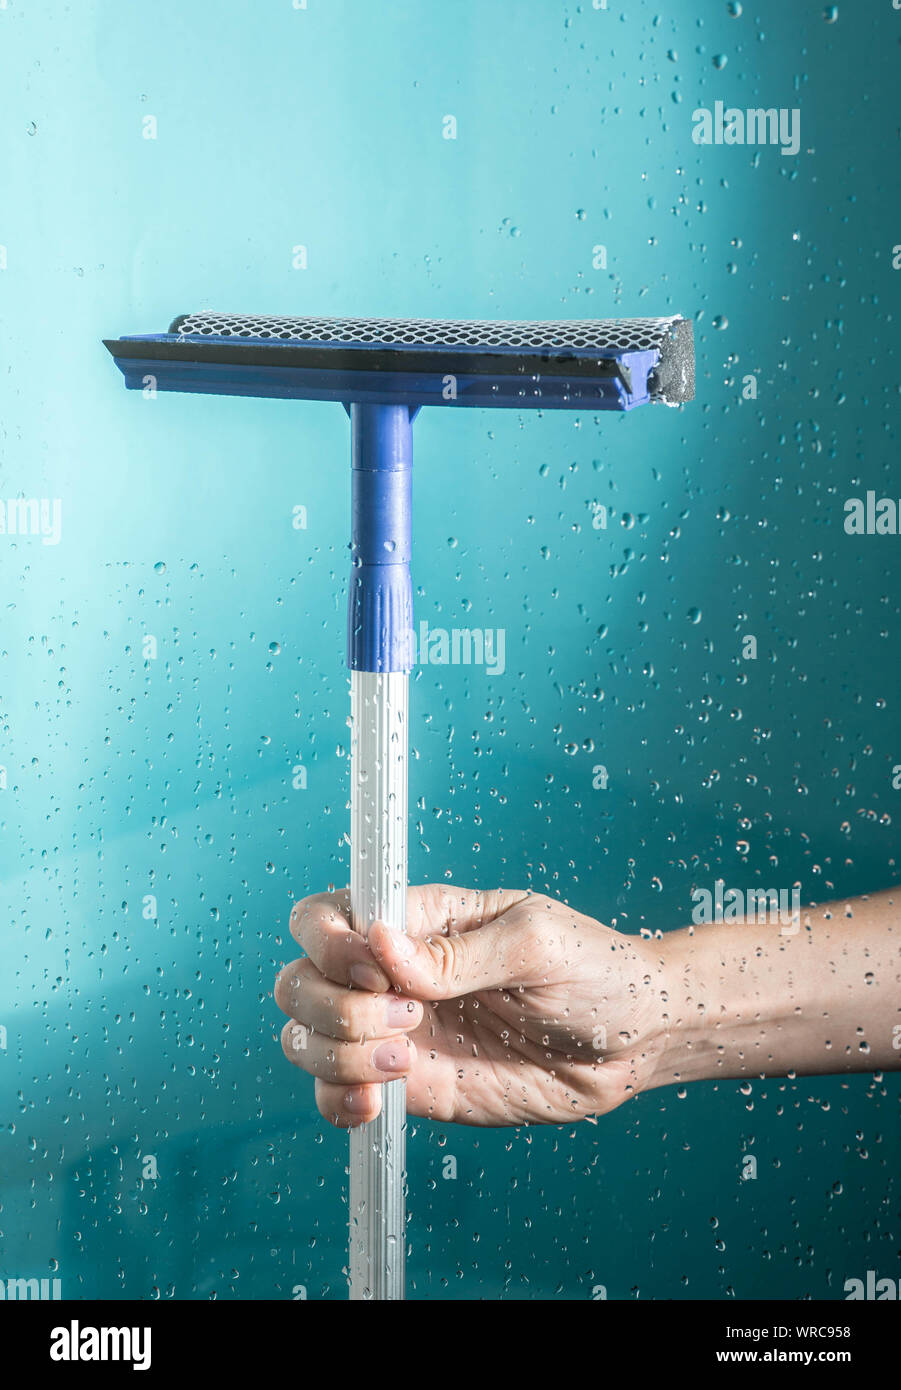 Squeegee Stock Photo by ©stocksnapper 2098105